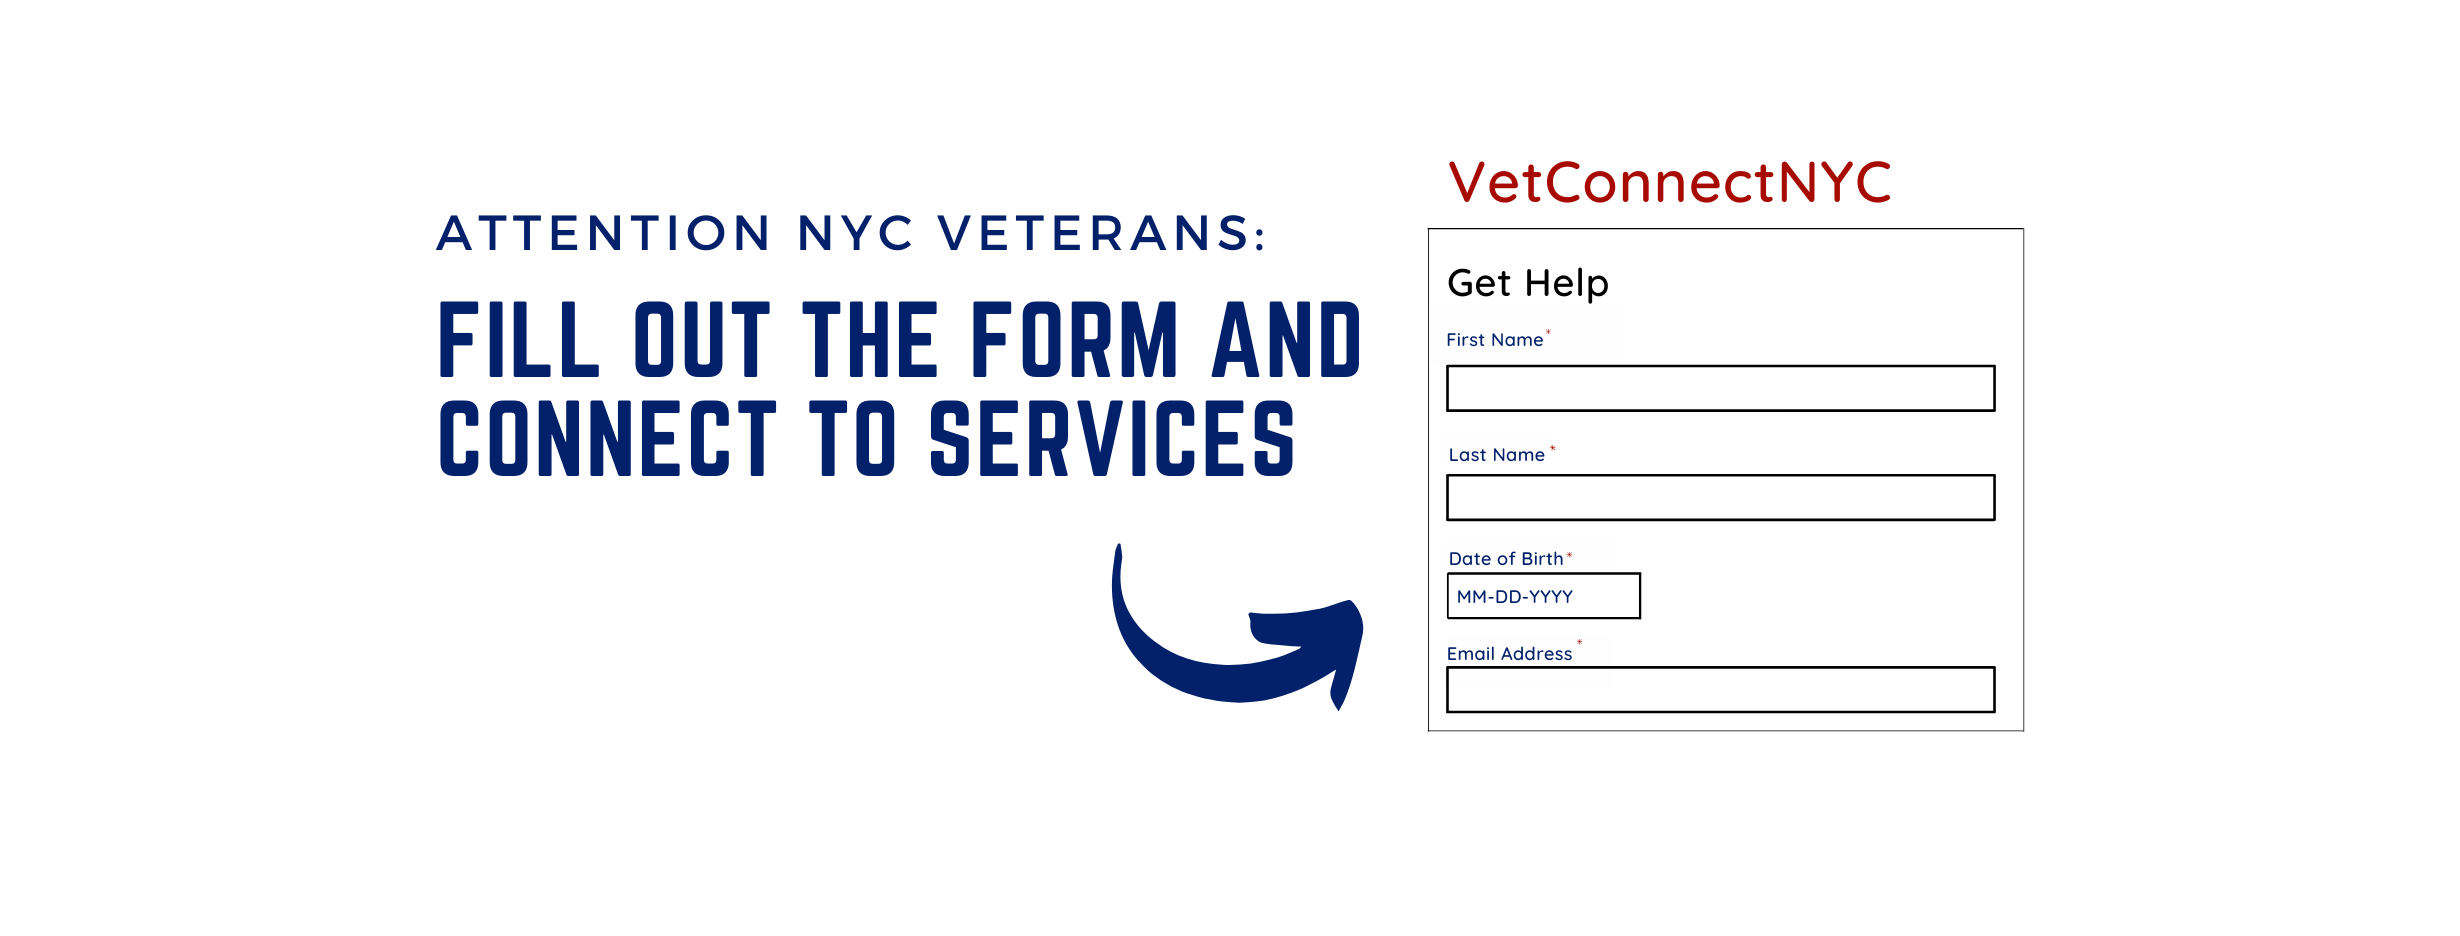 Example of fields on the Get Help form that facilitates NYC Veterans' connecting to services